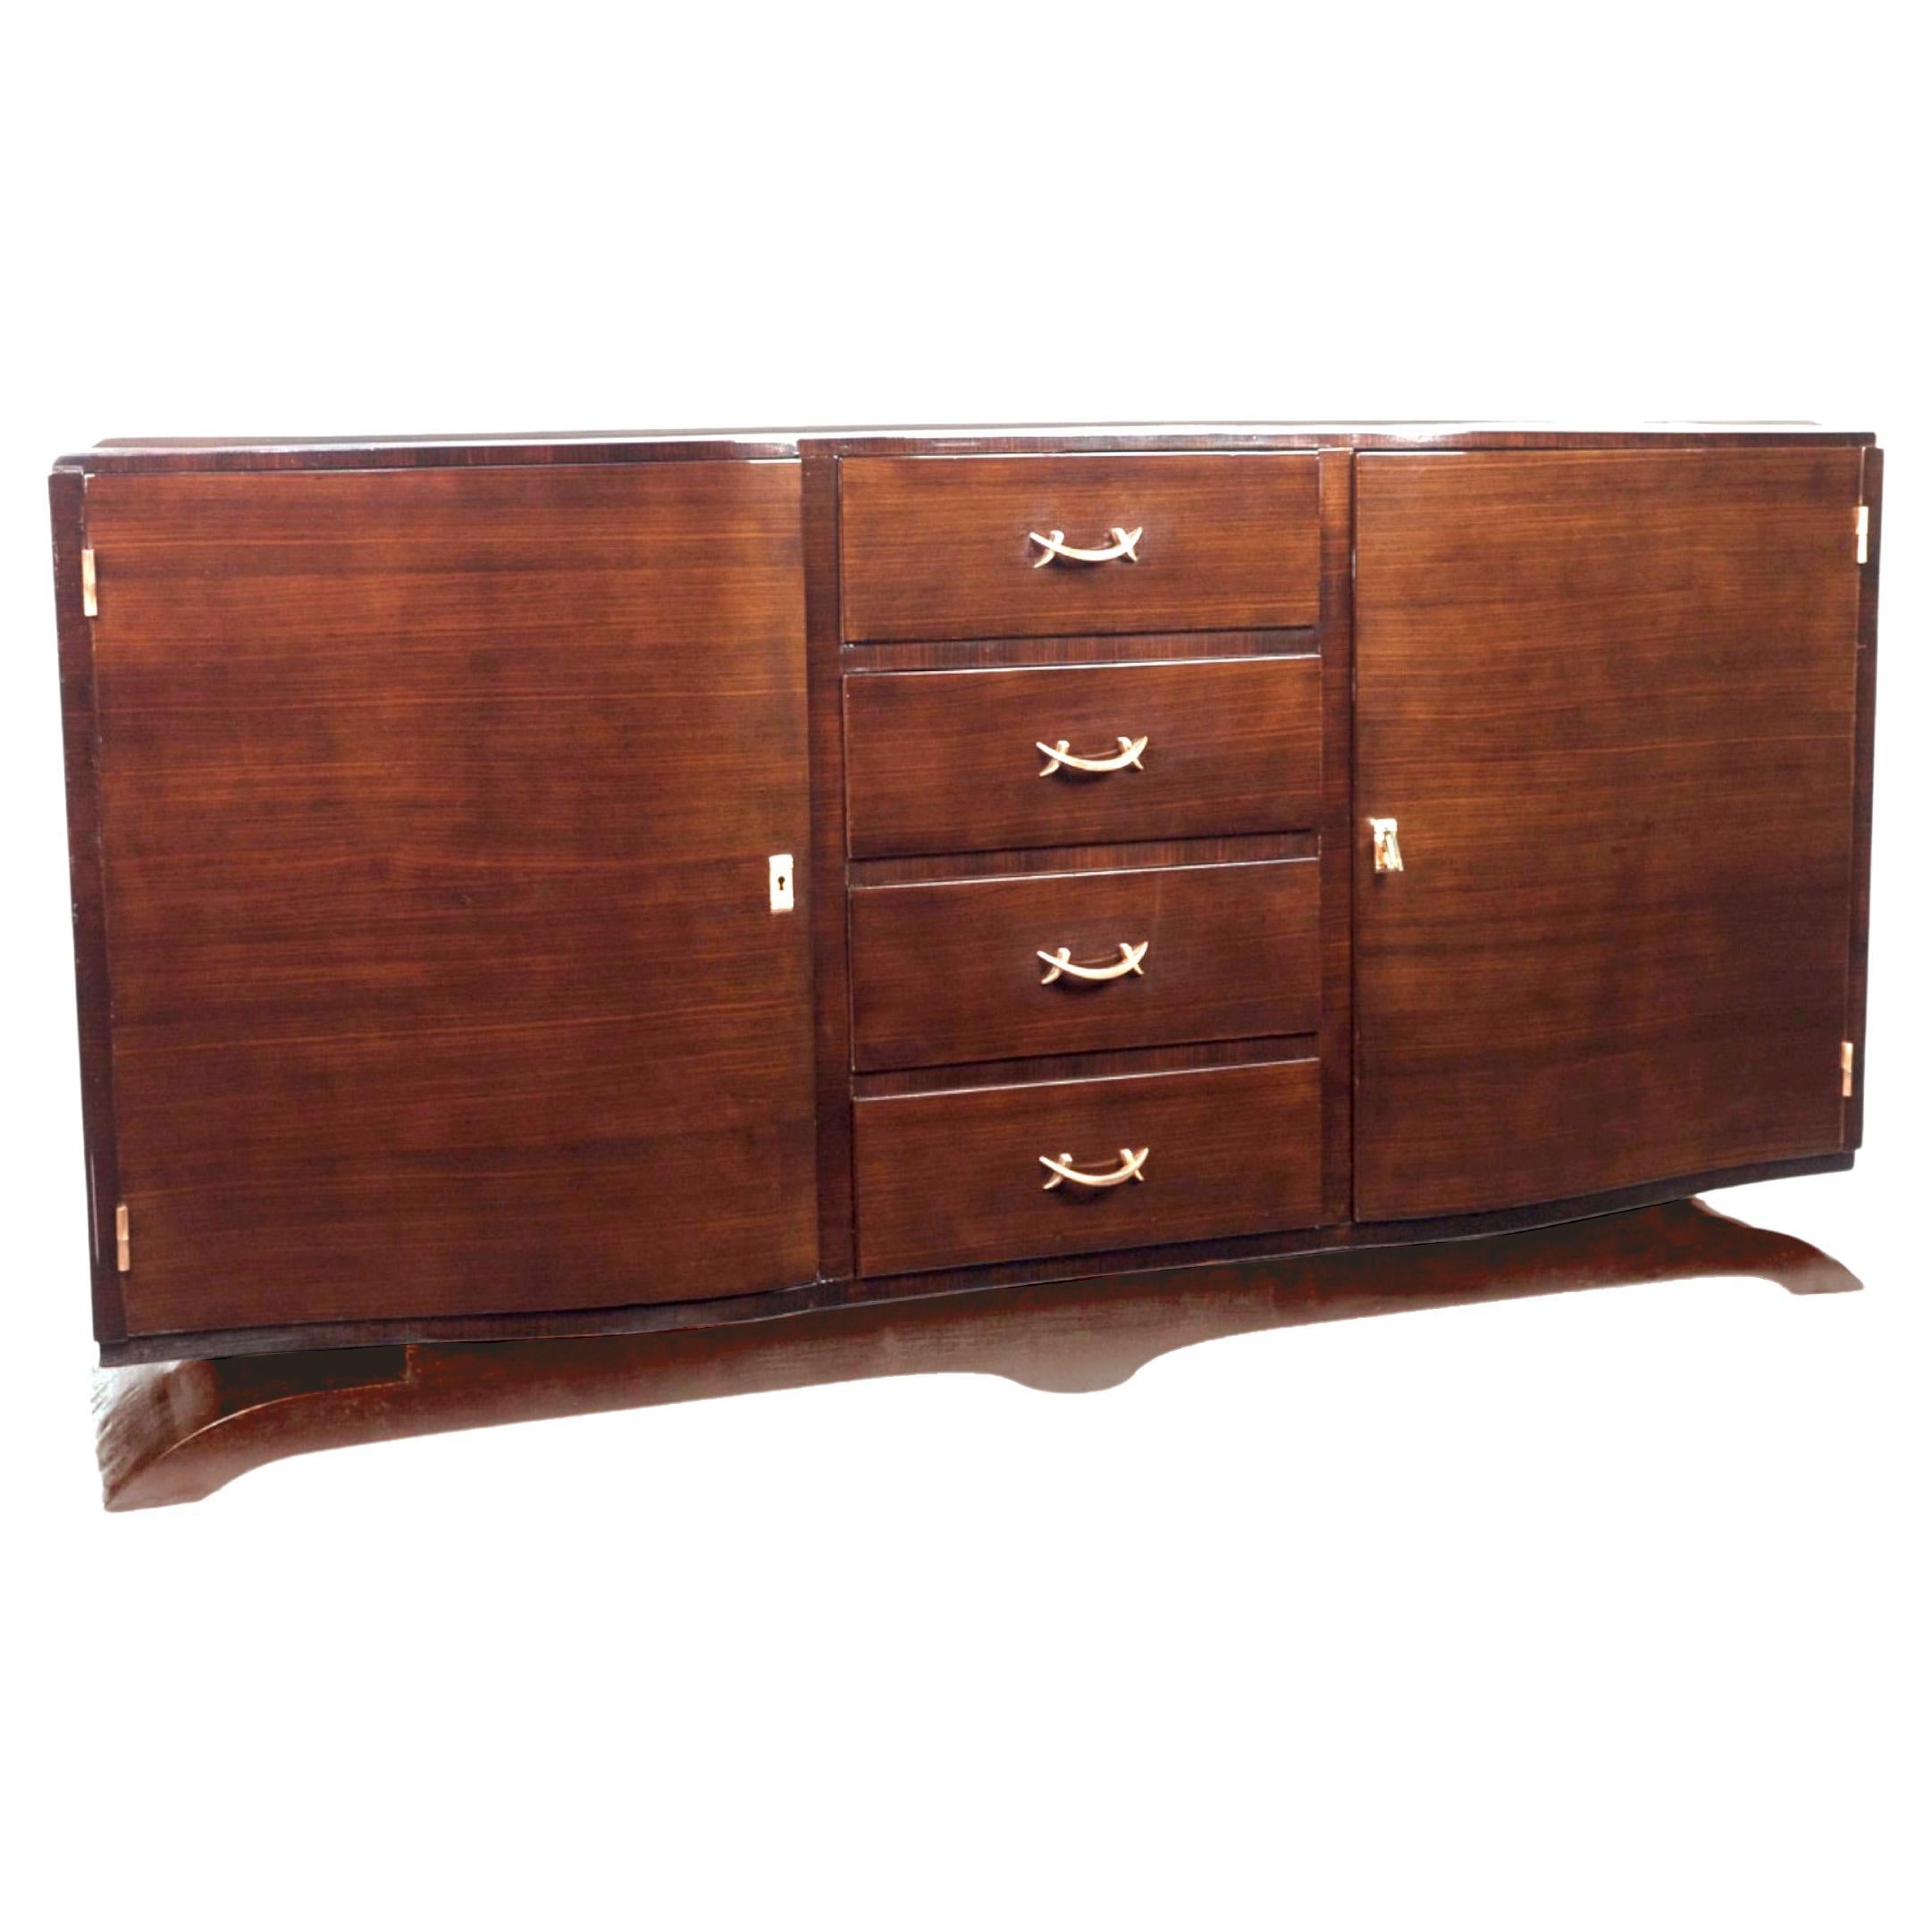 1940s Art Deco Copper Plated Sideboard